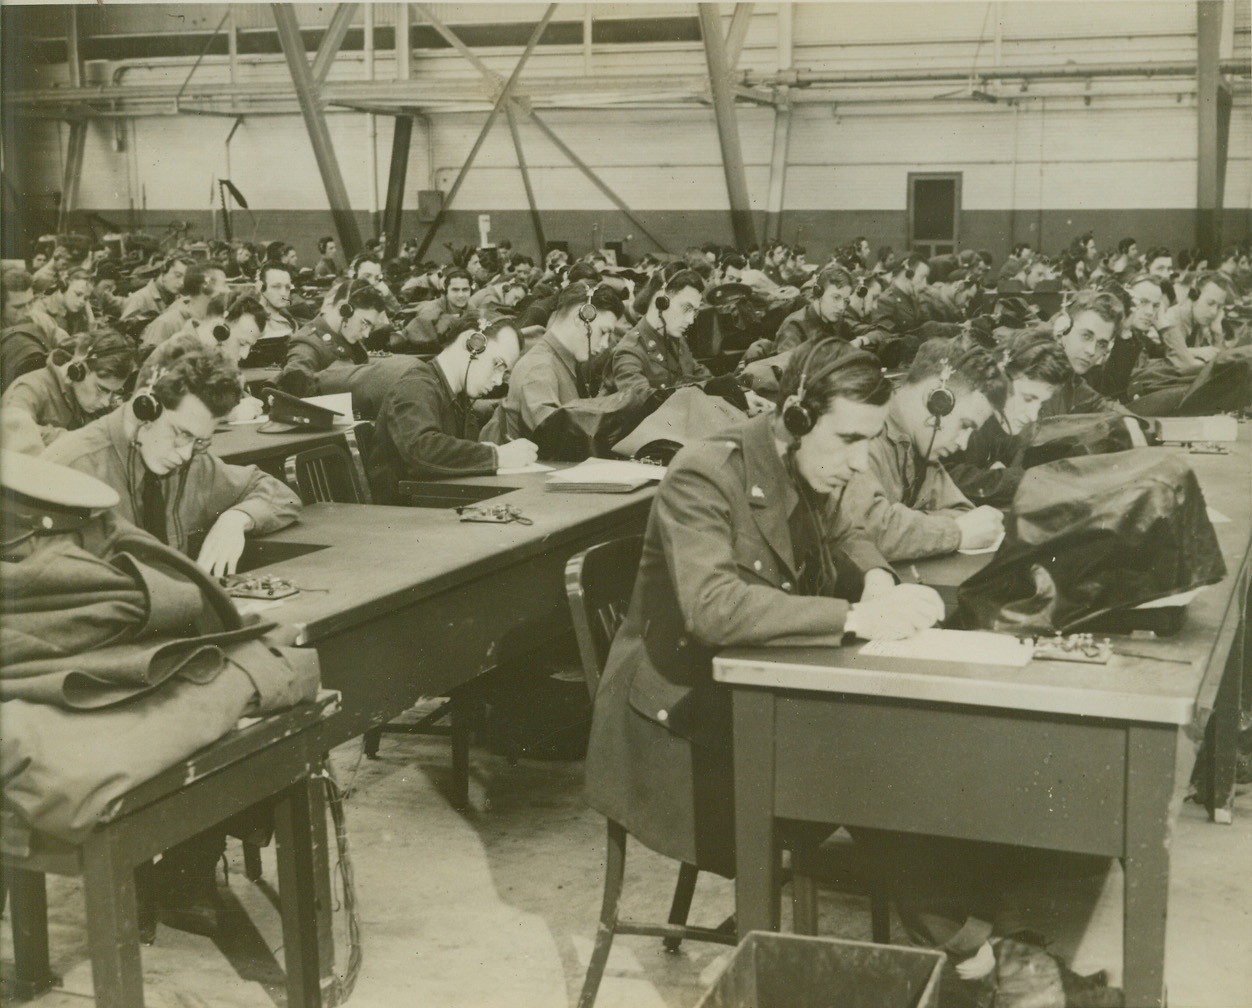 “Hams” of Other Years in the Army Now, 1/25/41  Belleville, Ill.—A lot of those “hams” you used to hear on short waves are in the Army now. Here’s a view of some 500 of them at Scott Field, the Army’s largest school for Air Corps radio operators and teletype men, receiving instruction in code transmission and receiving. Credit: ACME.;